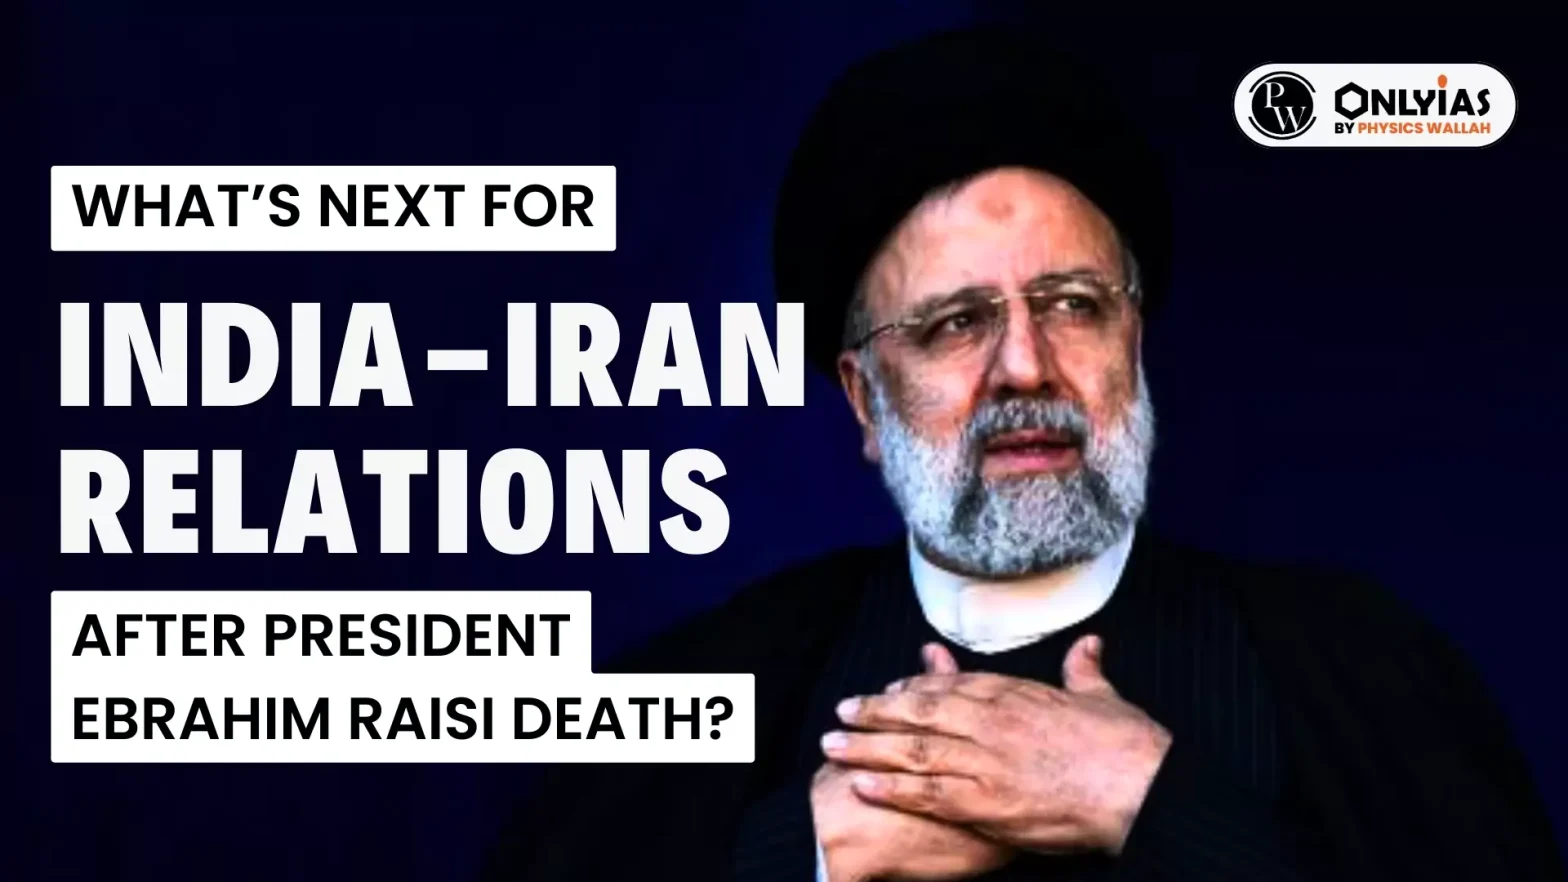 What’s Next for India-Iran Relations After President Ebrahim Raisi Death?